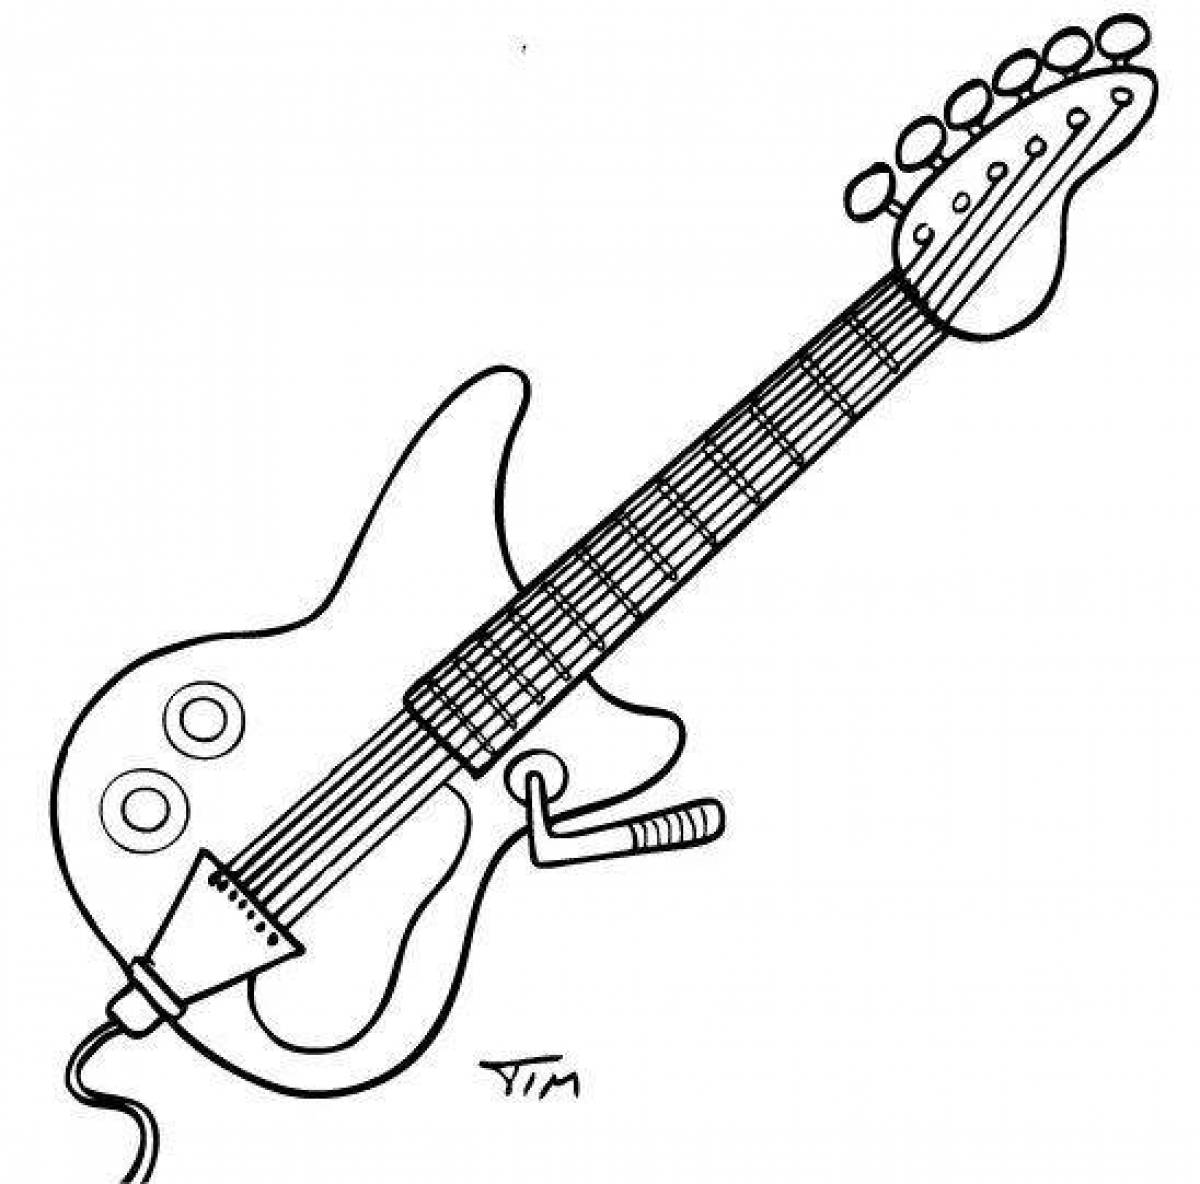 Amazing guitar coloring page for kids